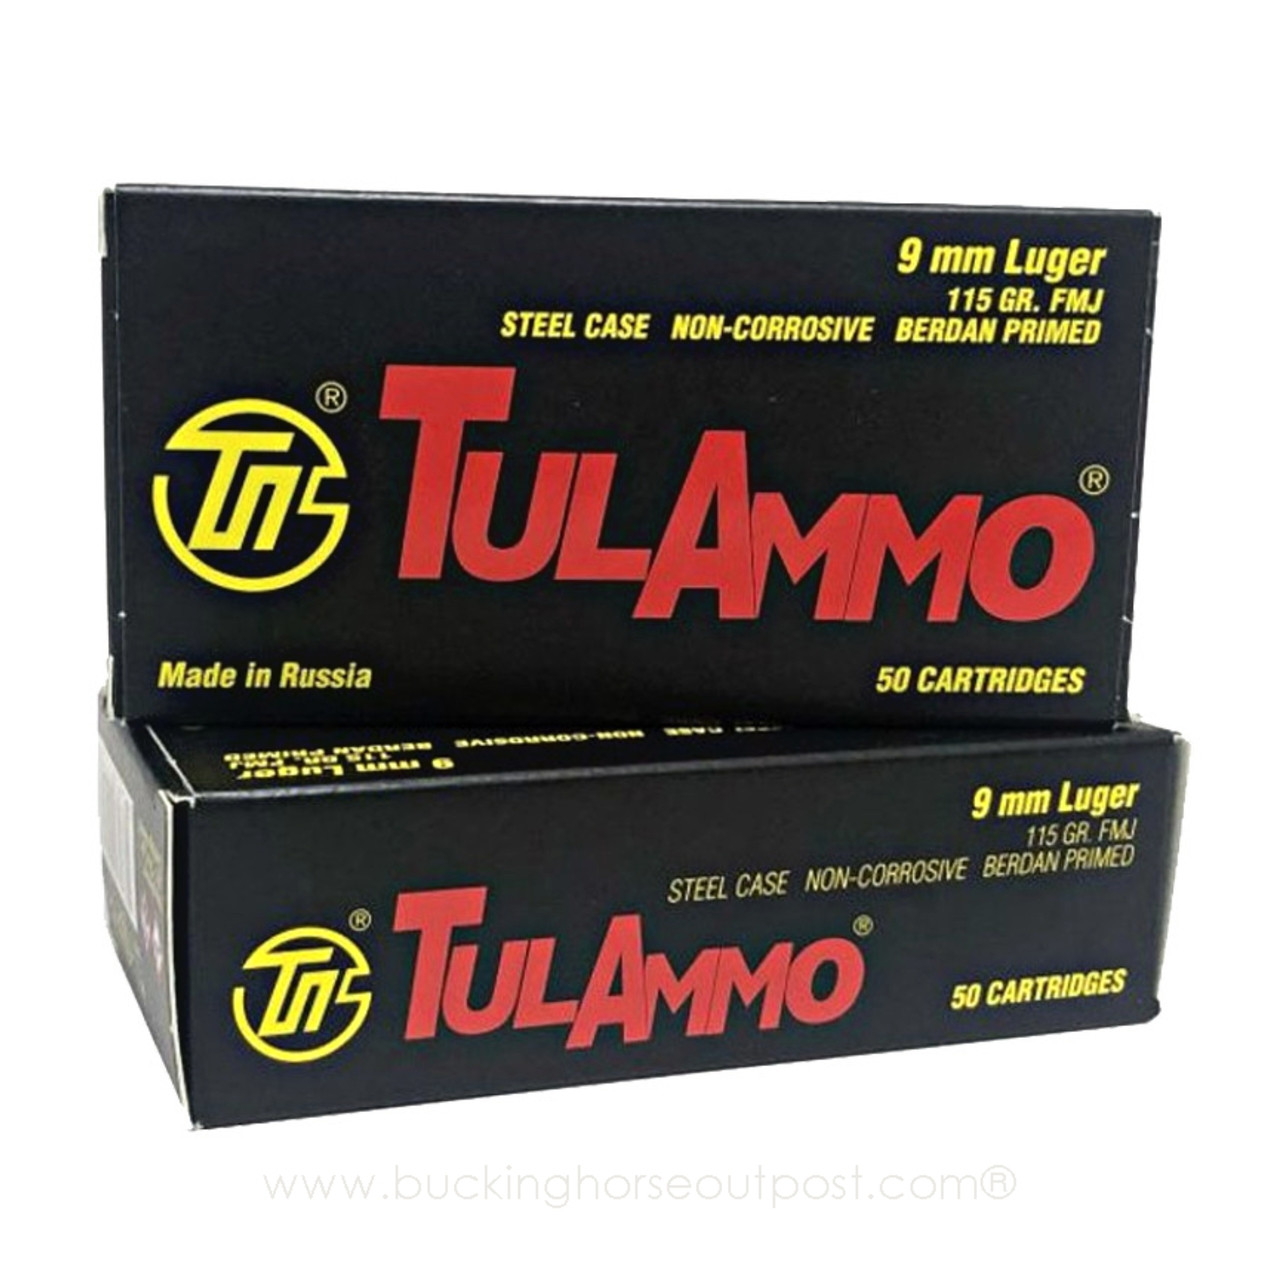 TulAmmo Pistol Cartridge 9mm Luger 115 Grain Full Metal Jacket Steel Case 50rds Per Box (TA919150)- FREE SHIPPING ON ORDERS $175 OR MORE